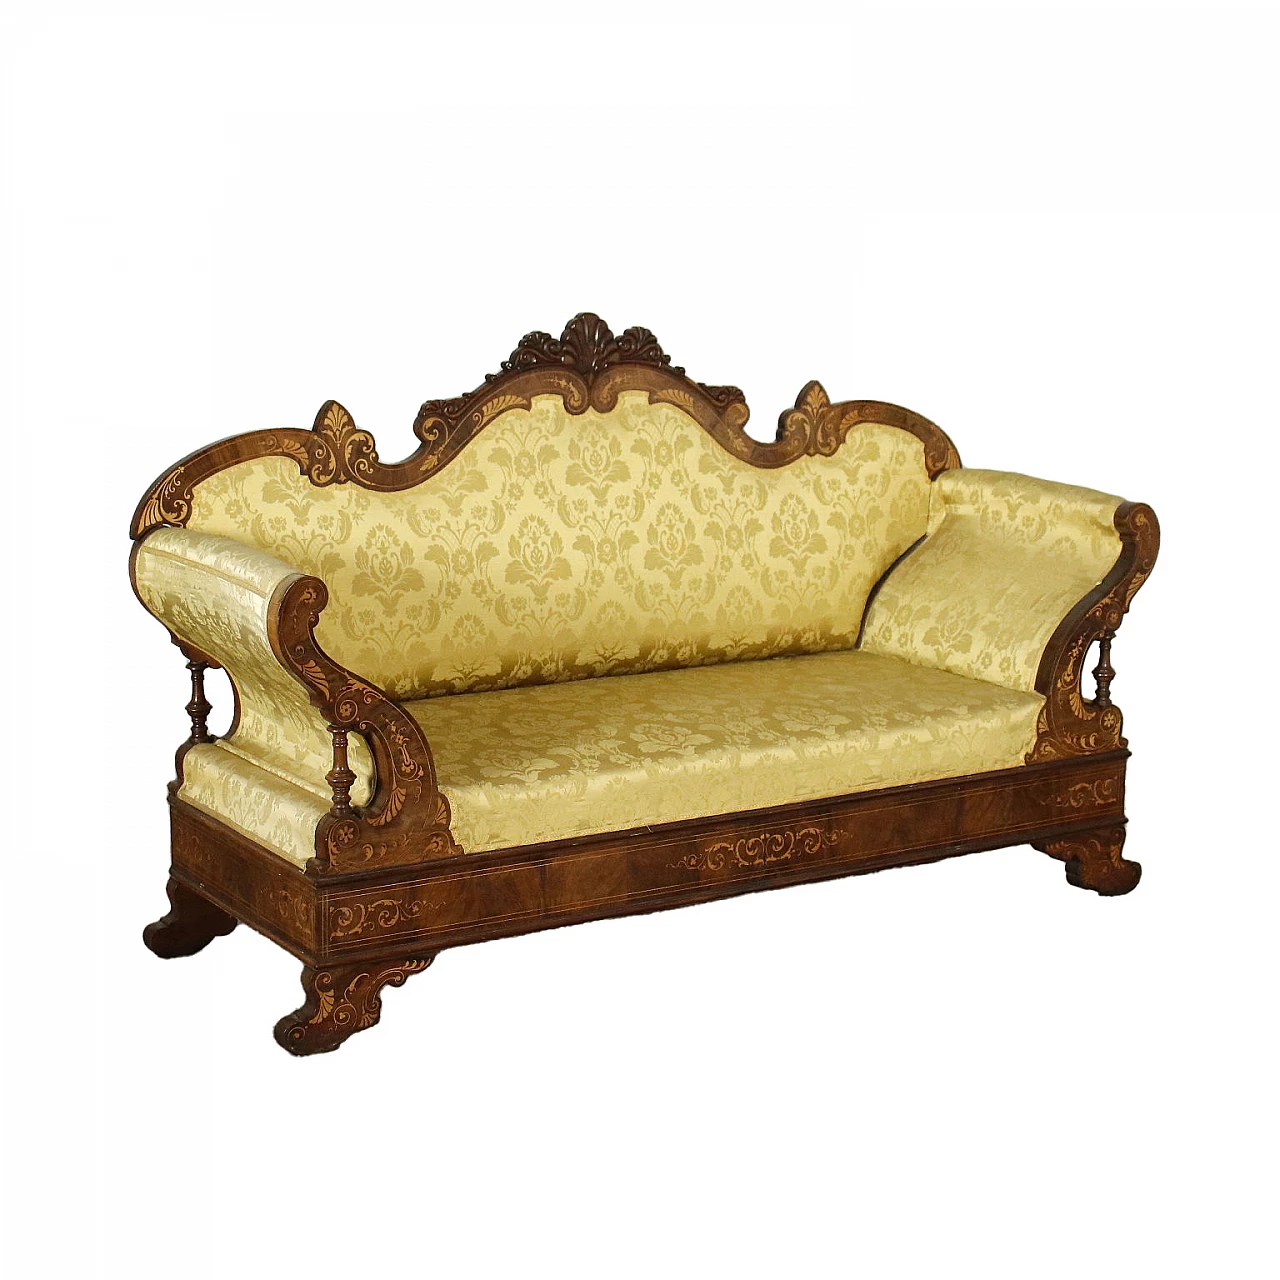 Charles X sofa in walnut with maple inlays, 19th century 1